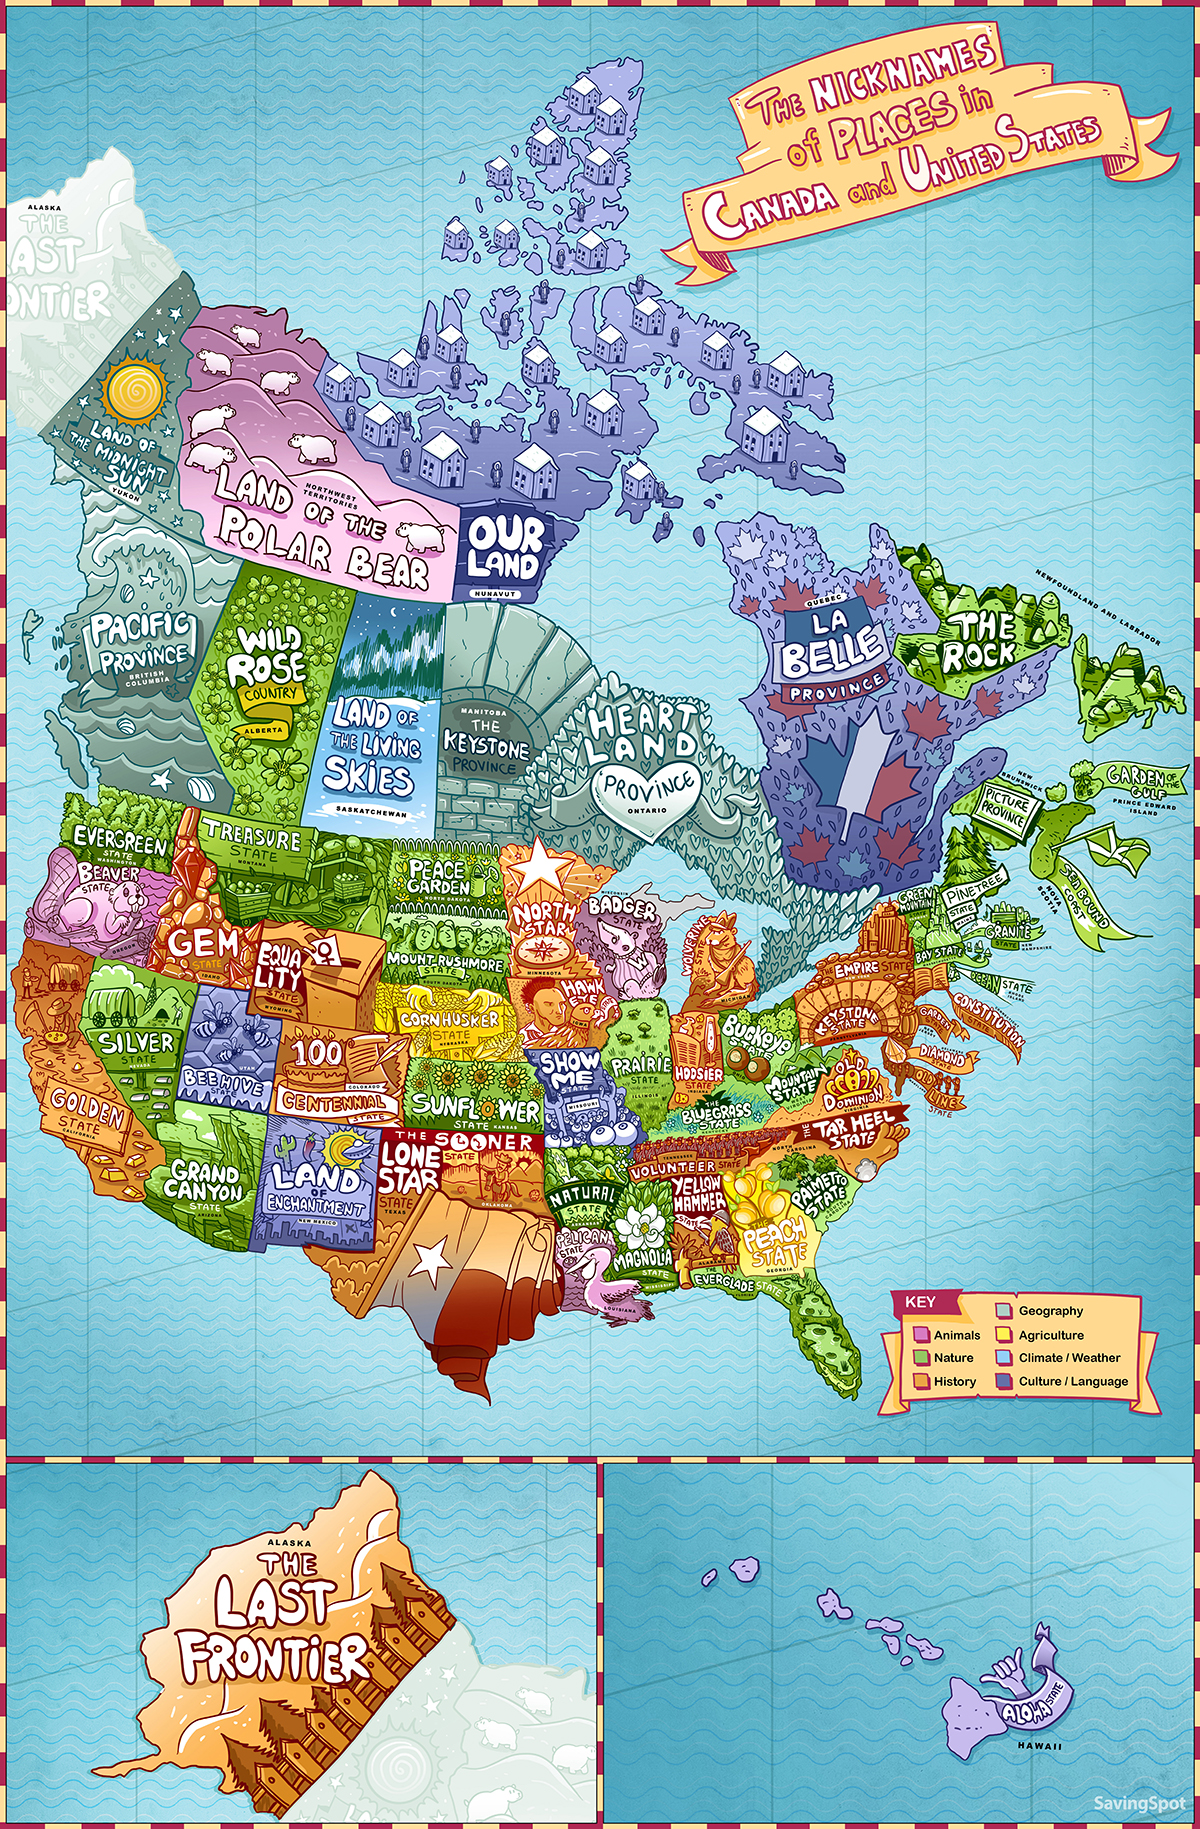 Colorful cartoon map of U.S. and Canada filled in with relative nicknames for each state and province